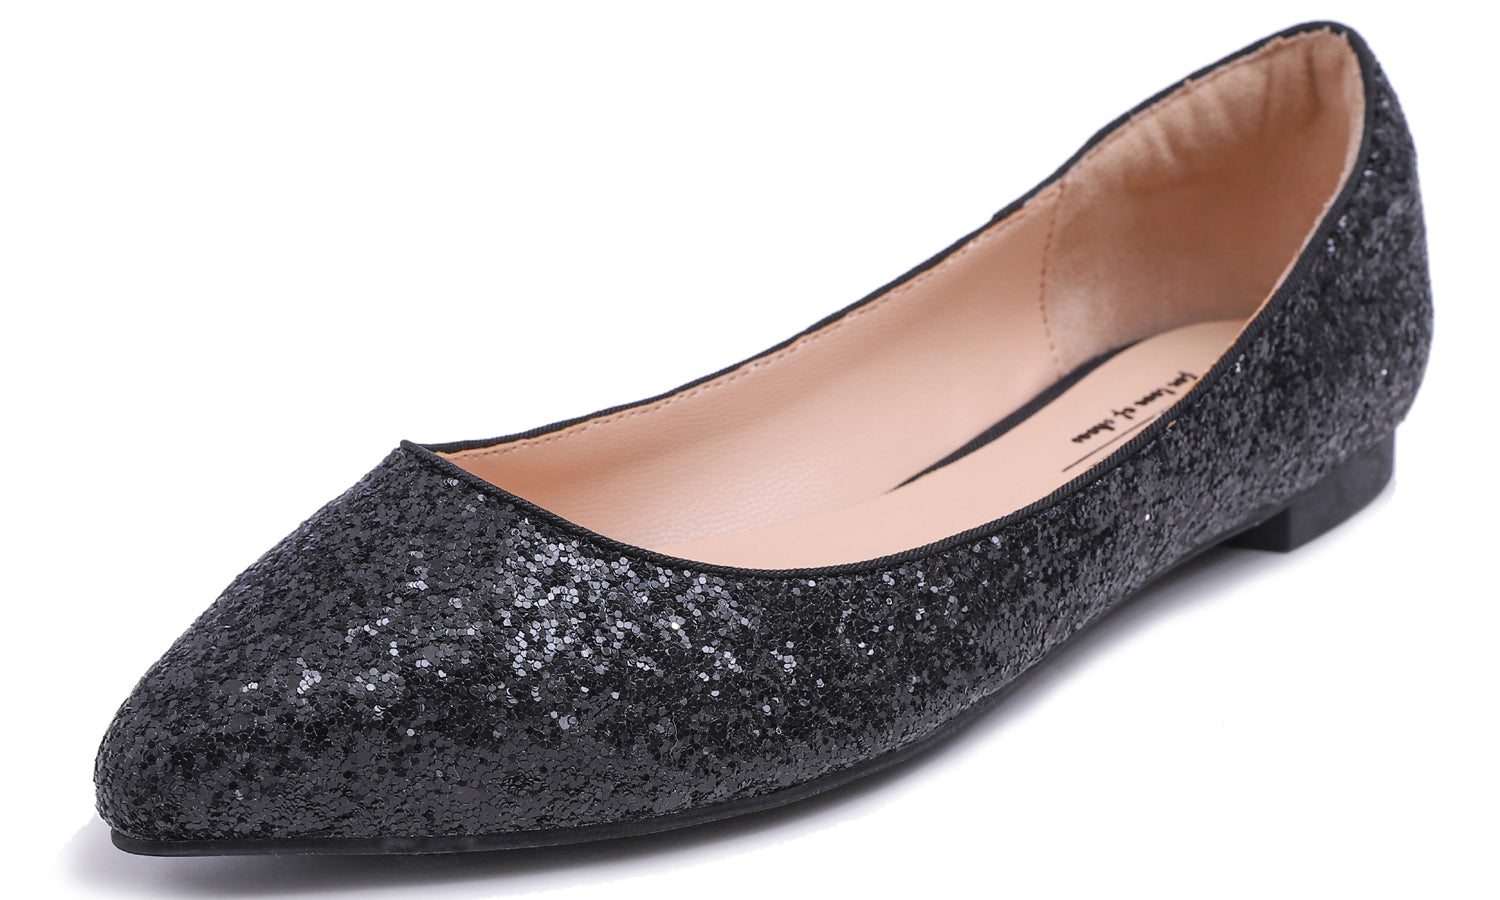 Feversole Women's Sparkle Memory Foam Cushioned Colorful Shiny Ballet Flats Glitter Black Pointed